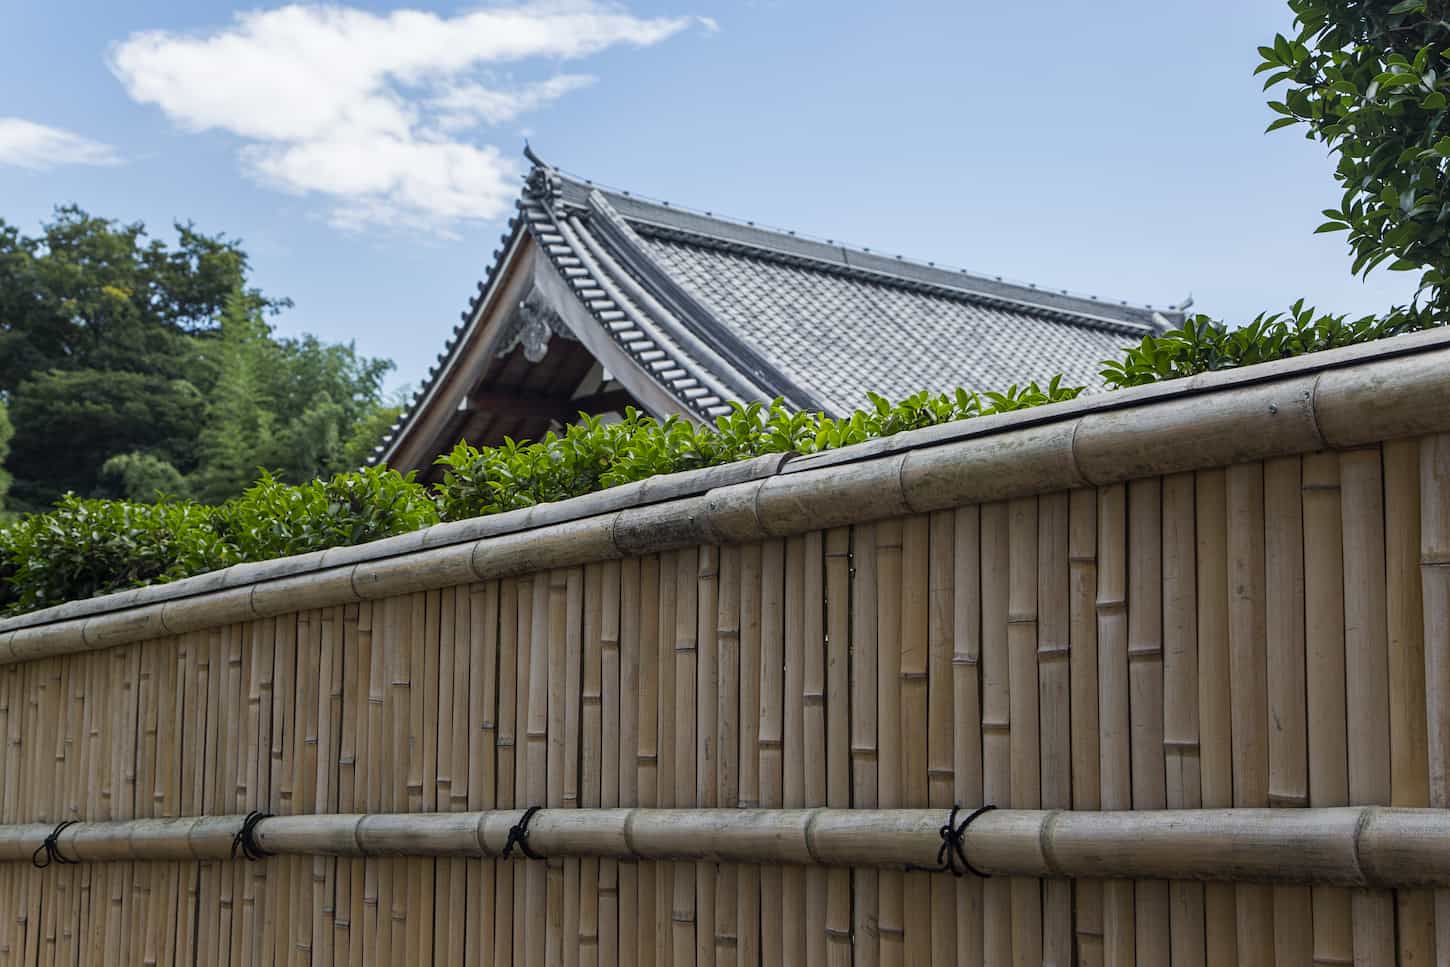 An image of a Closeup view of a detail from the bamboo fence in Arashiyama, Kyoto, Japan.